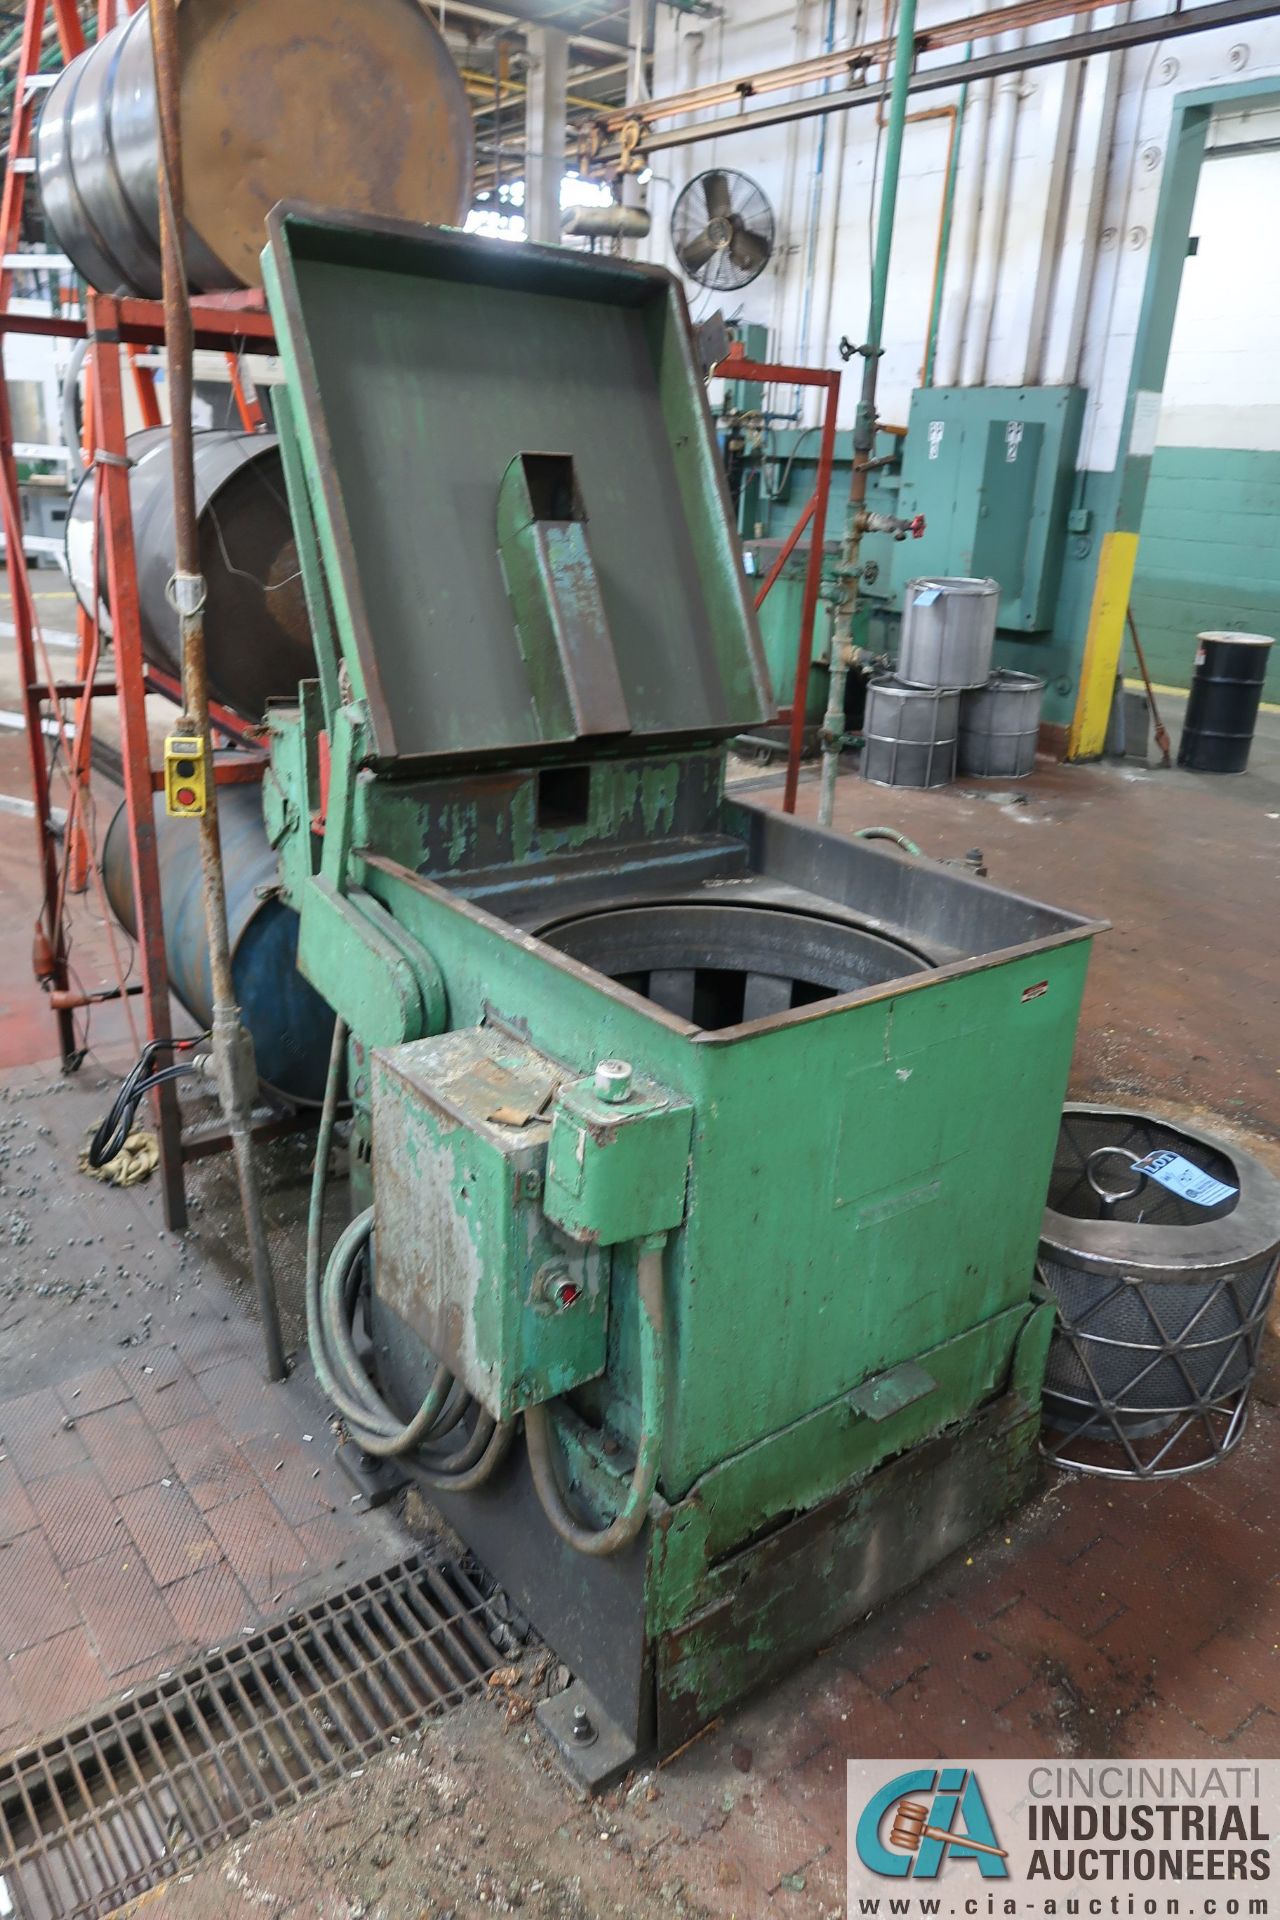 24" DIA. X 18" DEEP BARRETT SPIN TYPE PARTS DRYER WITH BASKET - Loading fee due the "ERRA" - Image 2 of 3